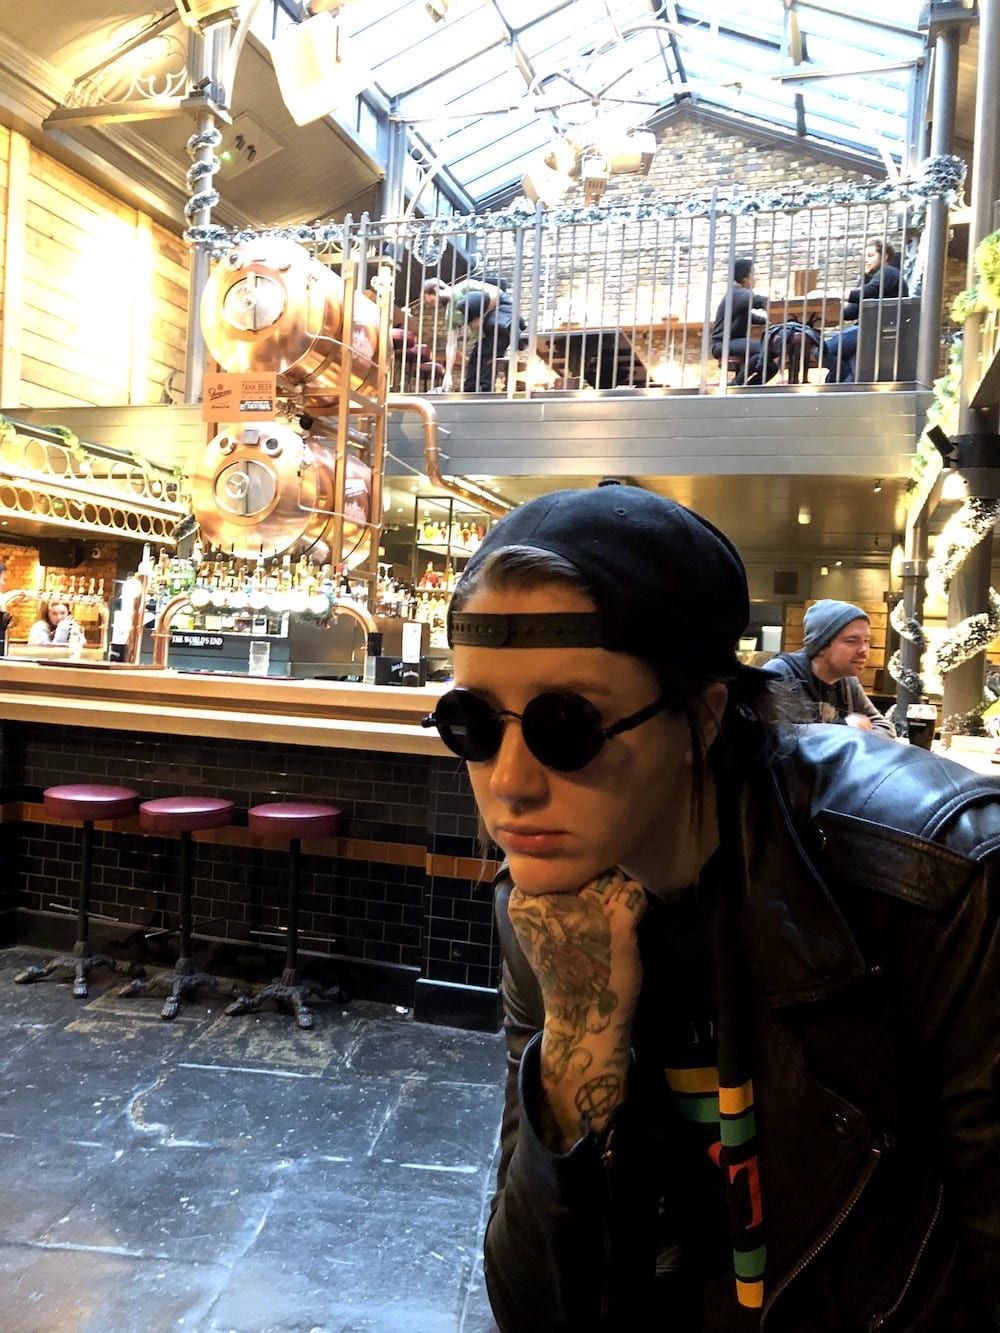 Elli sitting in a cafe wearing a cap and sunglasses